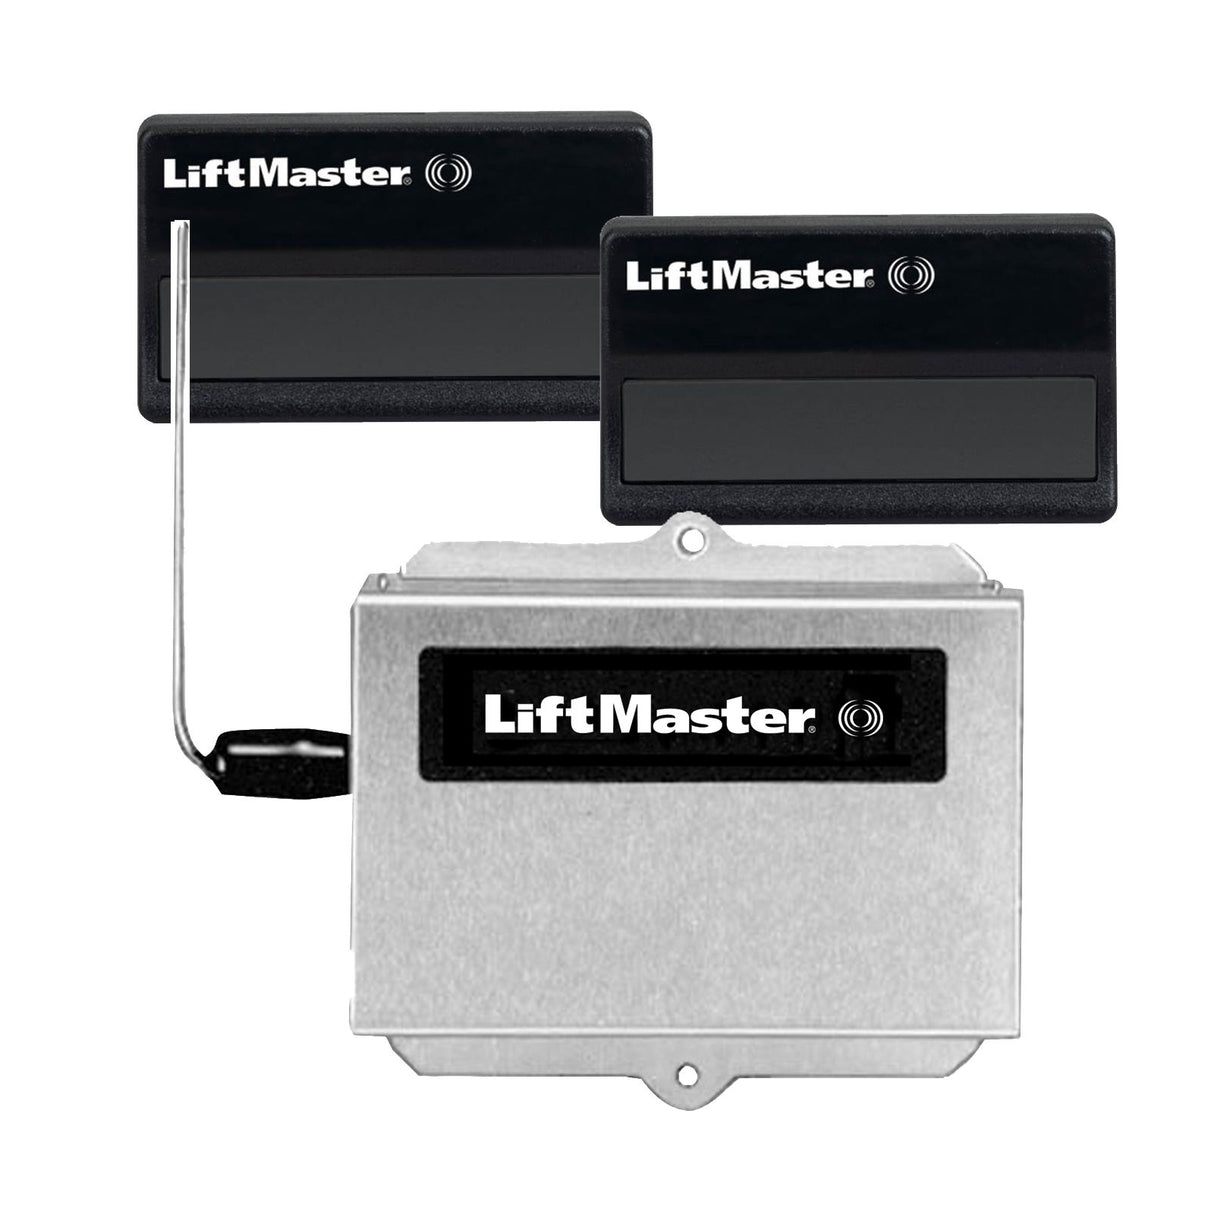 Liftmaster 315Mhz Receiver and 2 Remotes Combo